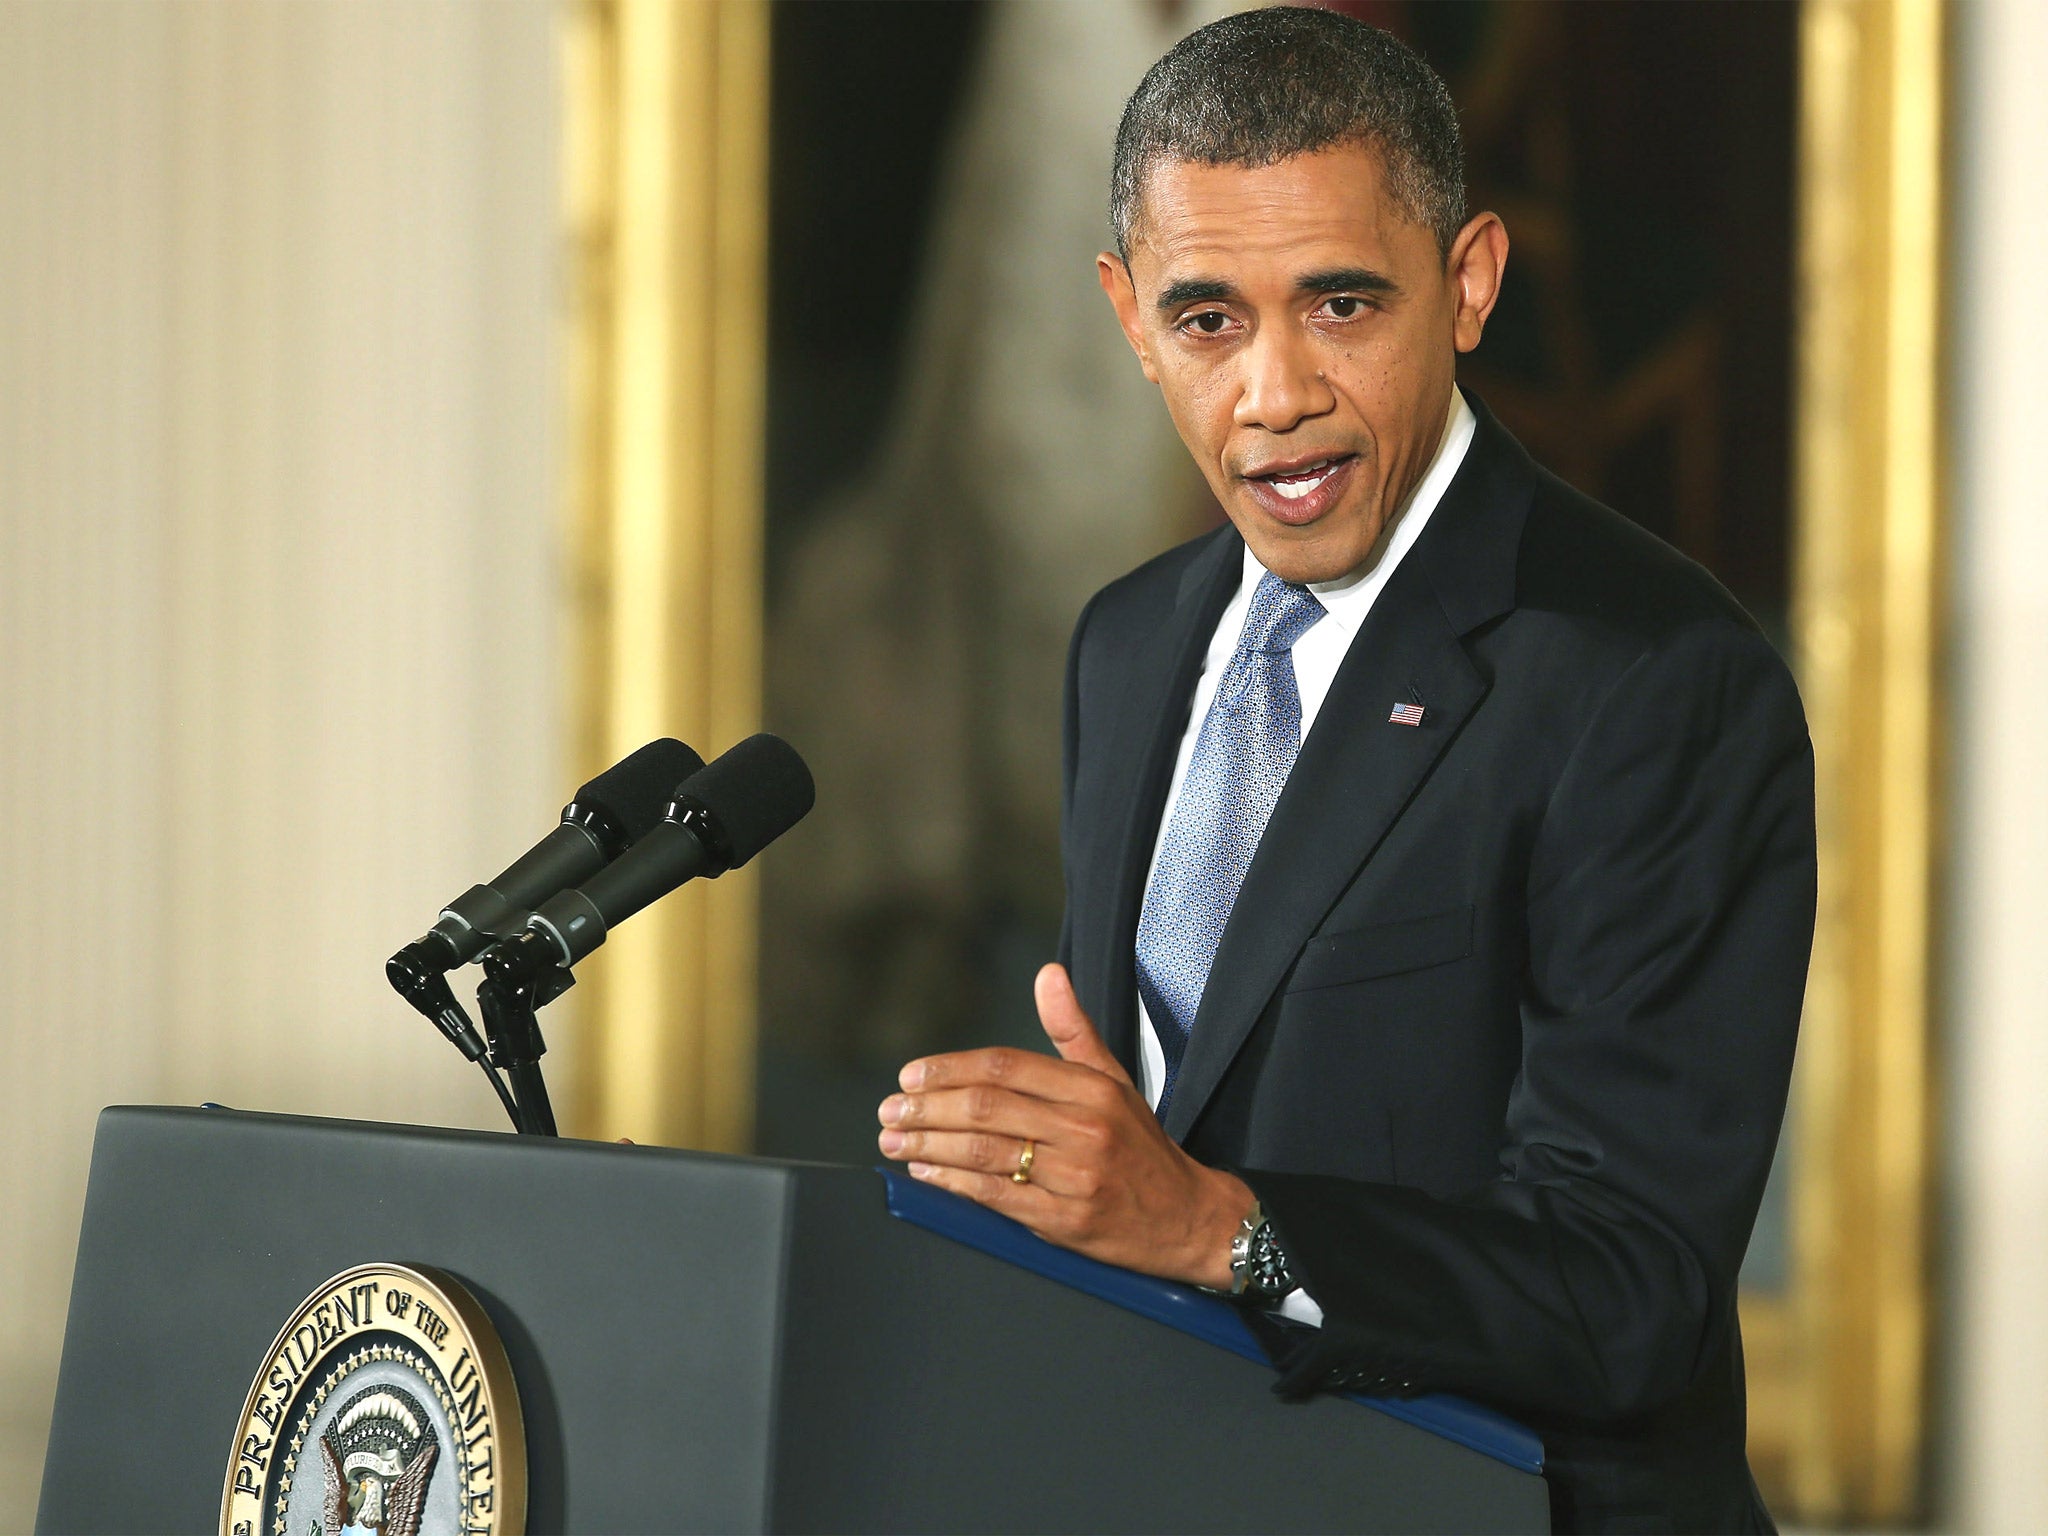 President Barack Obama during the press conference at the White House